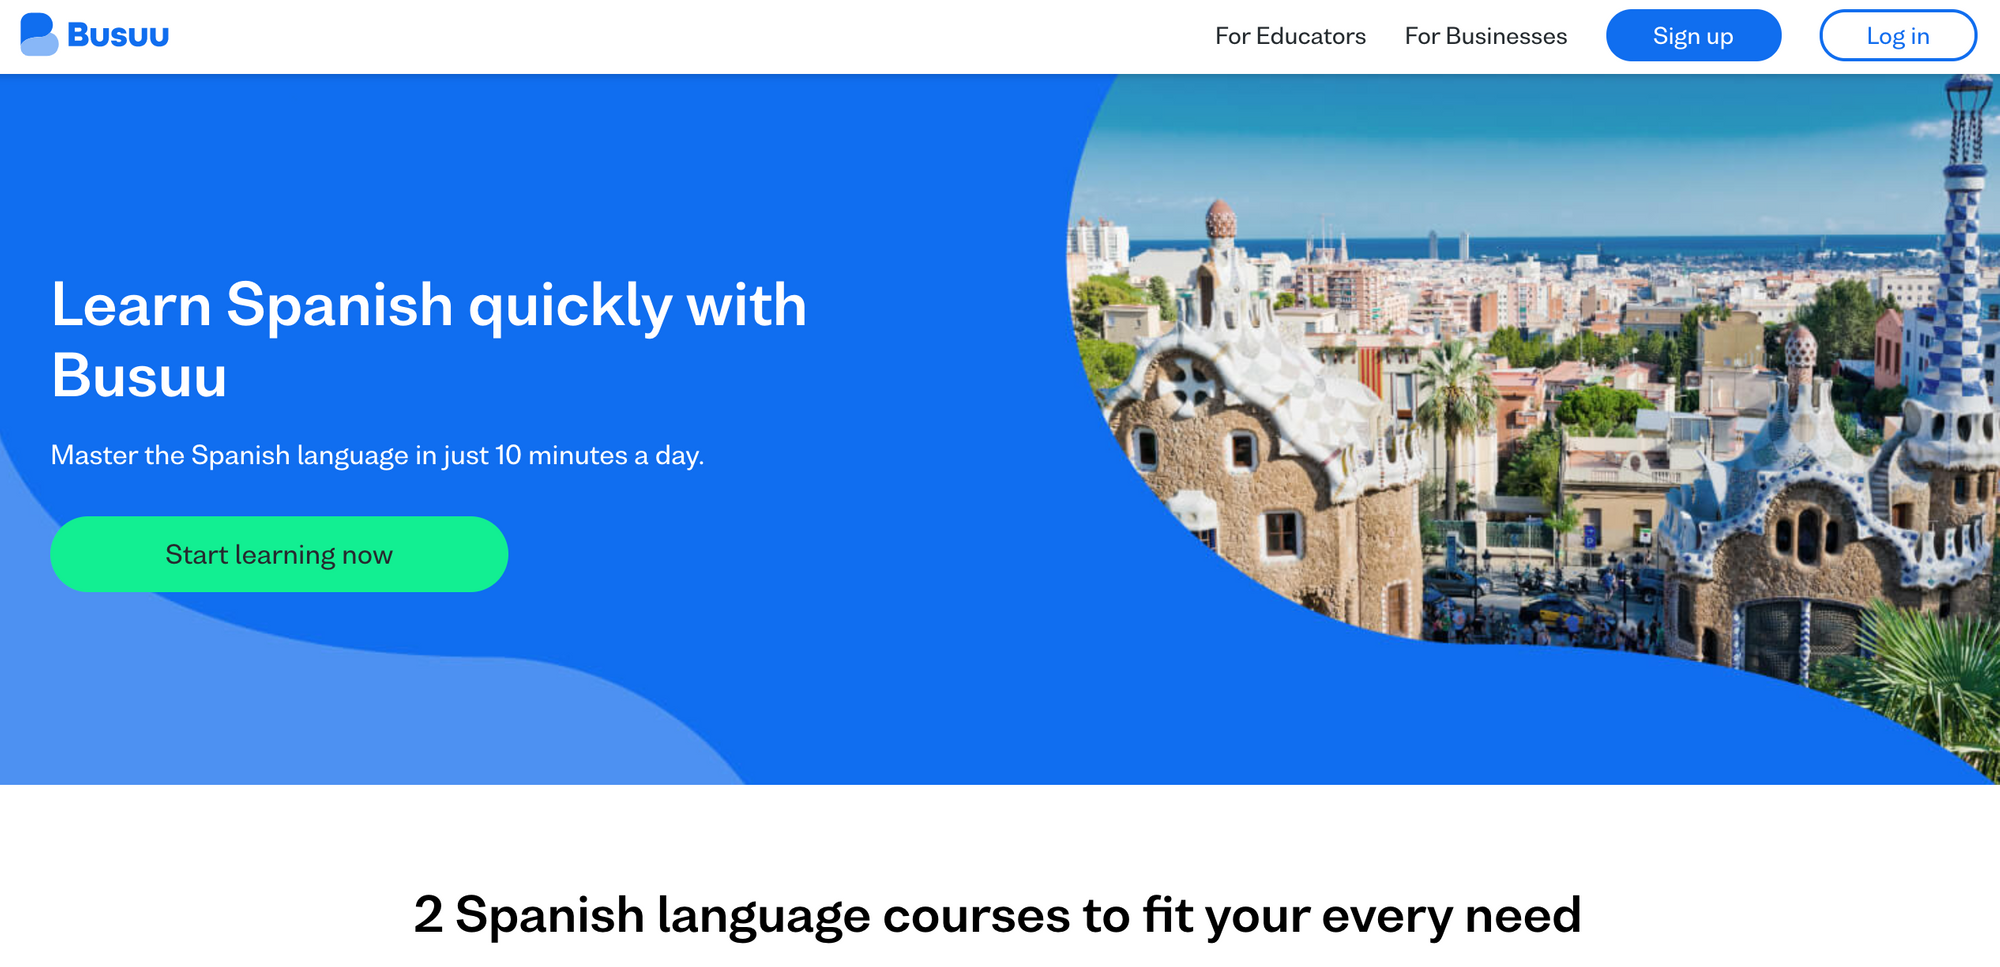 best free apps to learn spanish